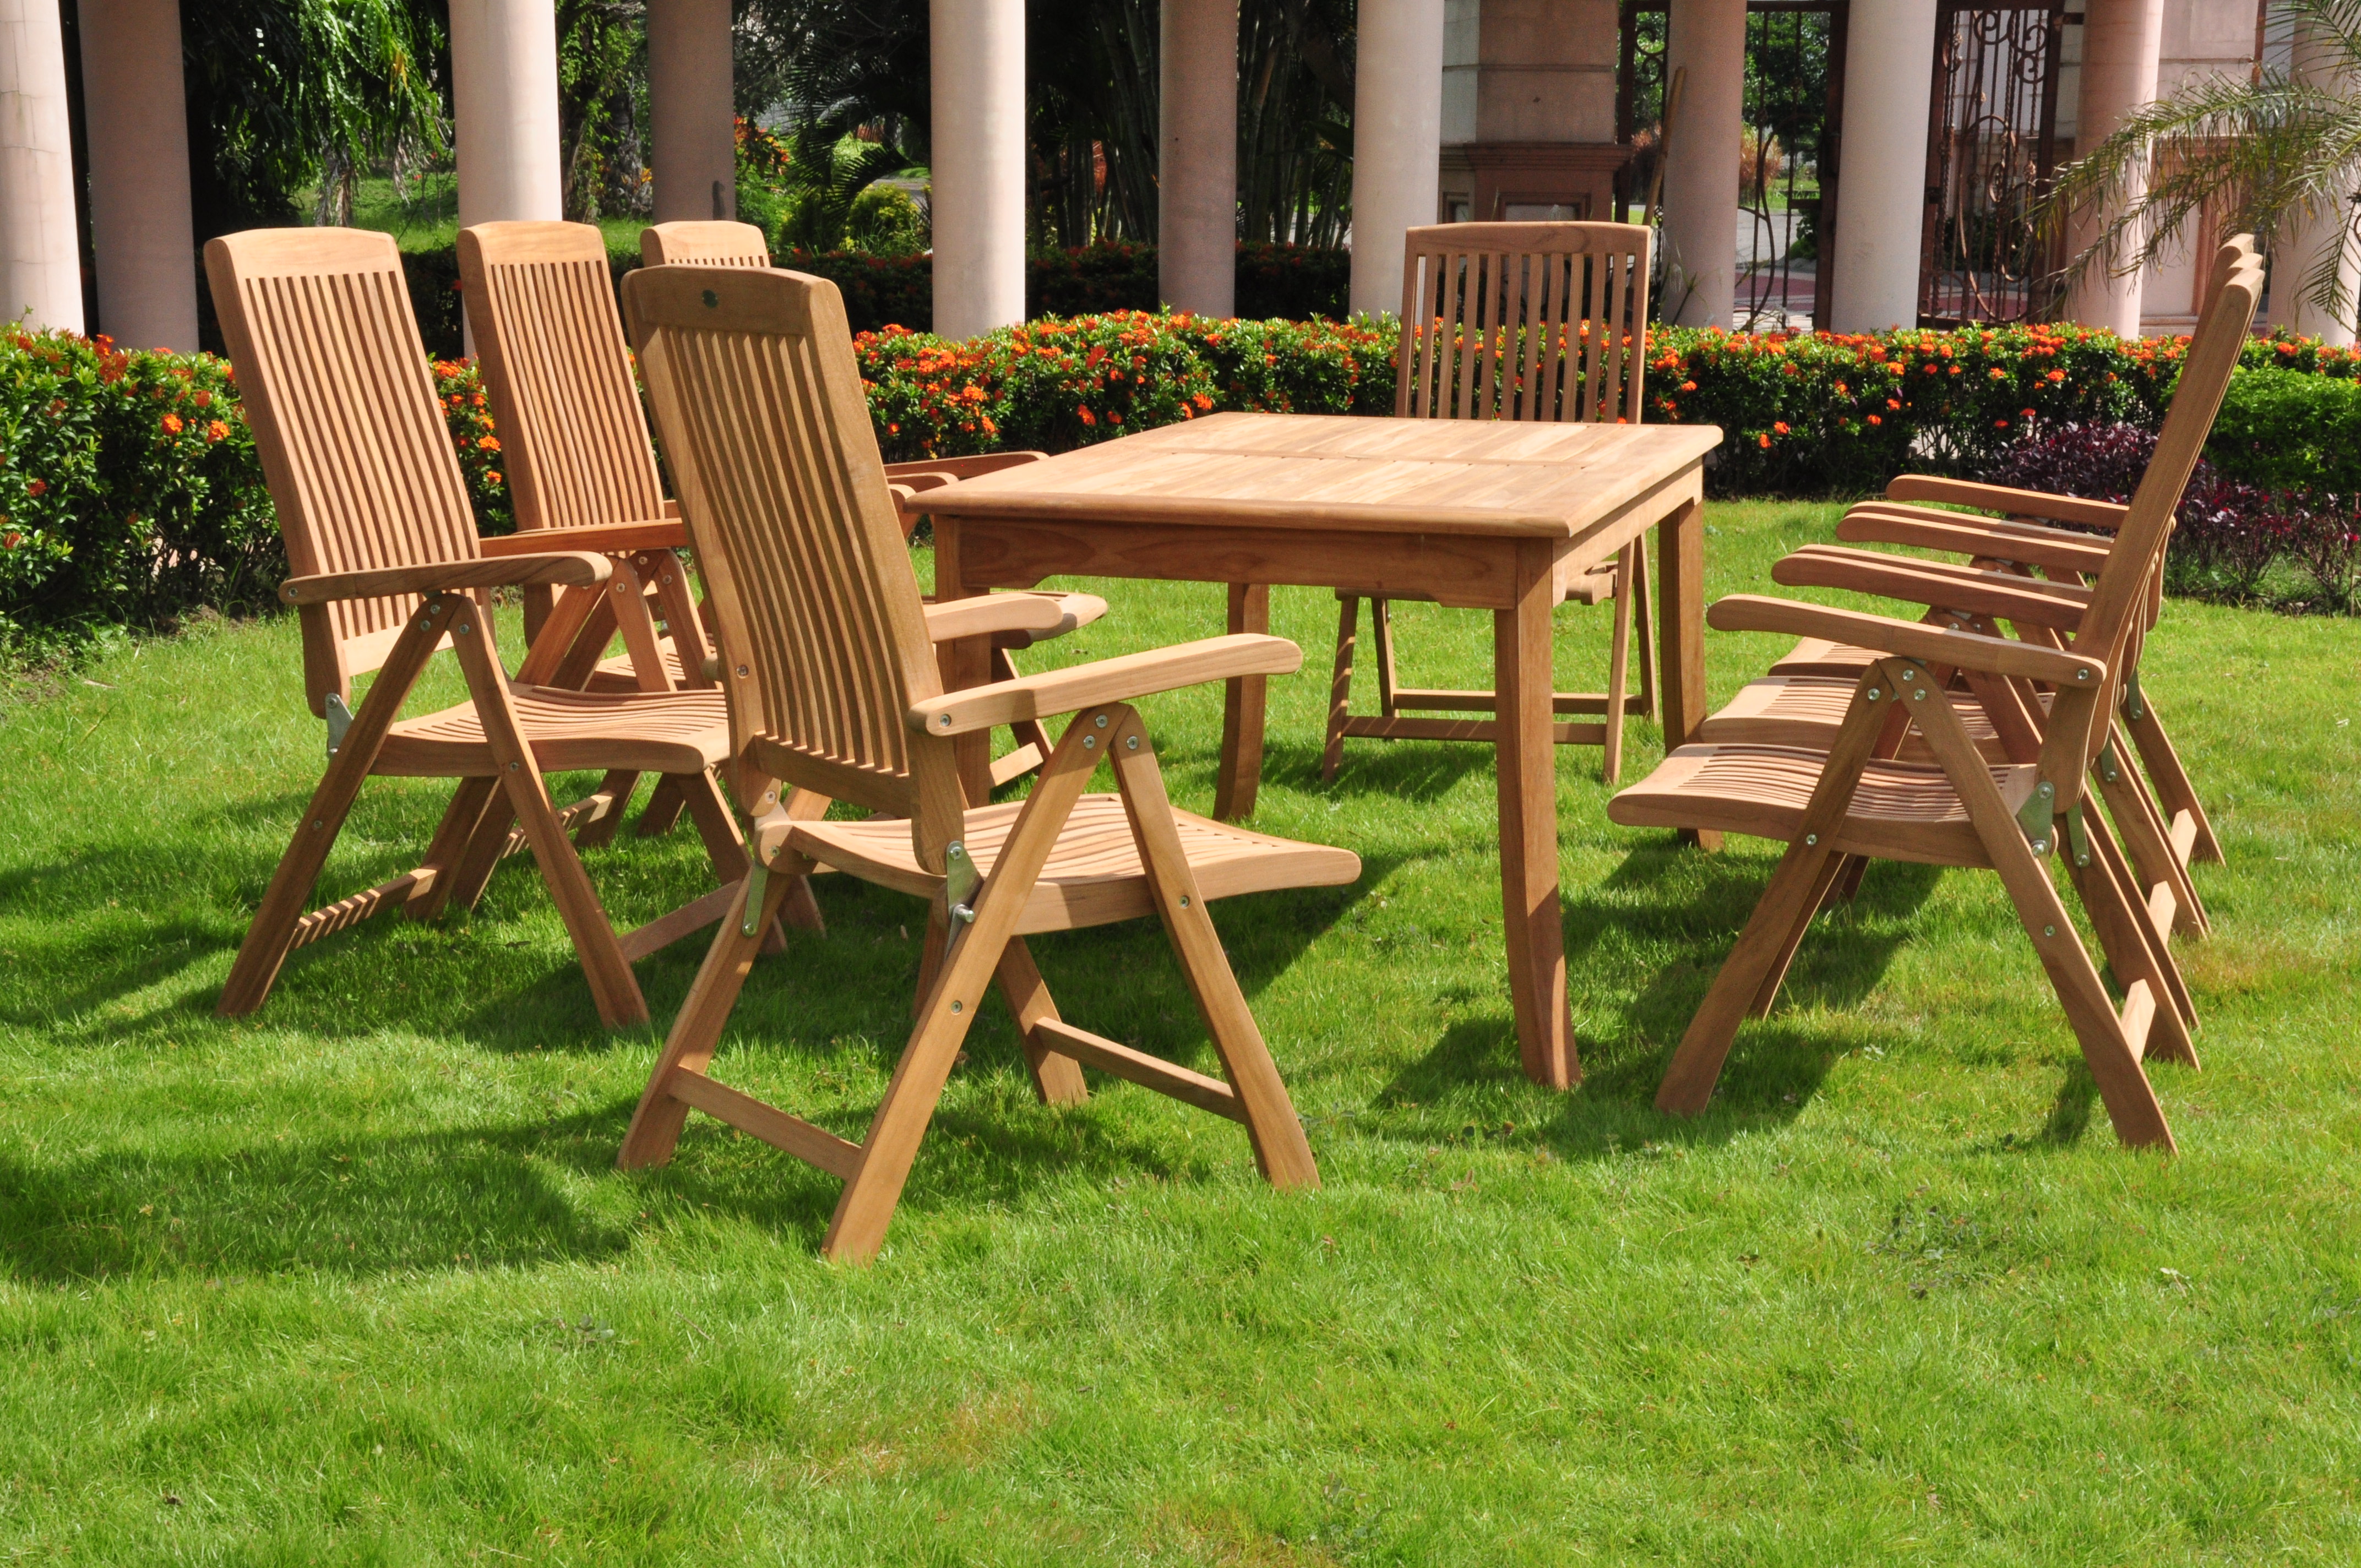 Teak Dining Set:8 Seater 9 Pc - 71" Rectangle Table And 8 Marley Reclining Arm Chairs Outdoor Patio Grade-A Teak Wood WholesaleTeak #WMDSMRa - image 1 of 4